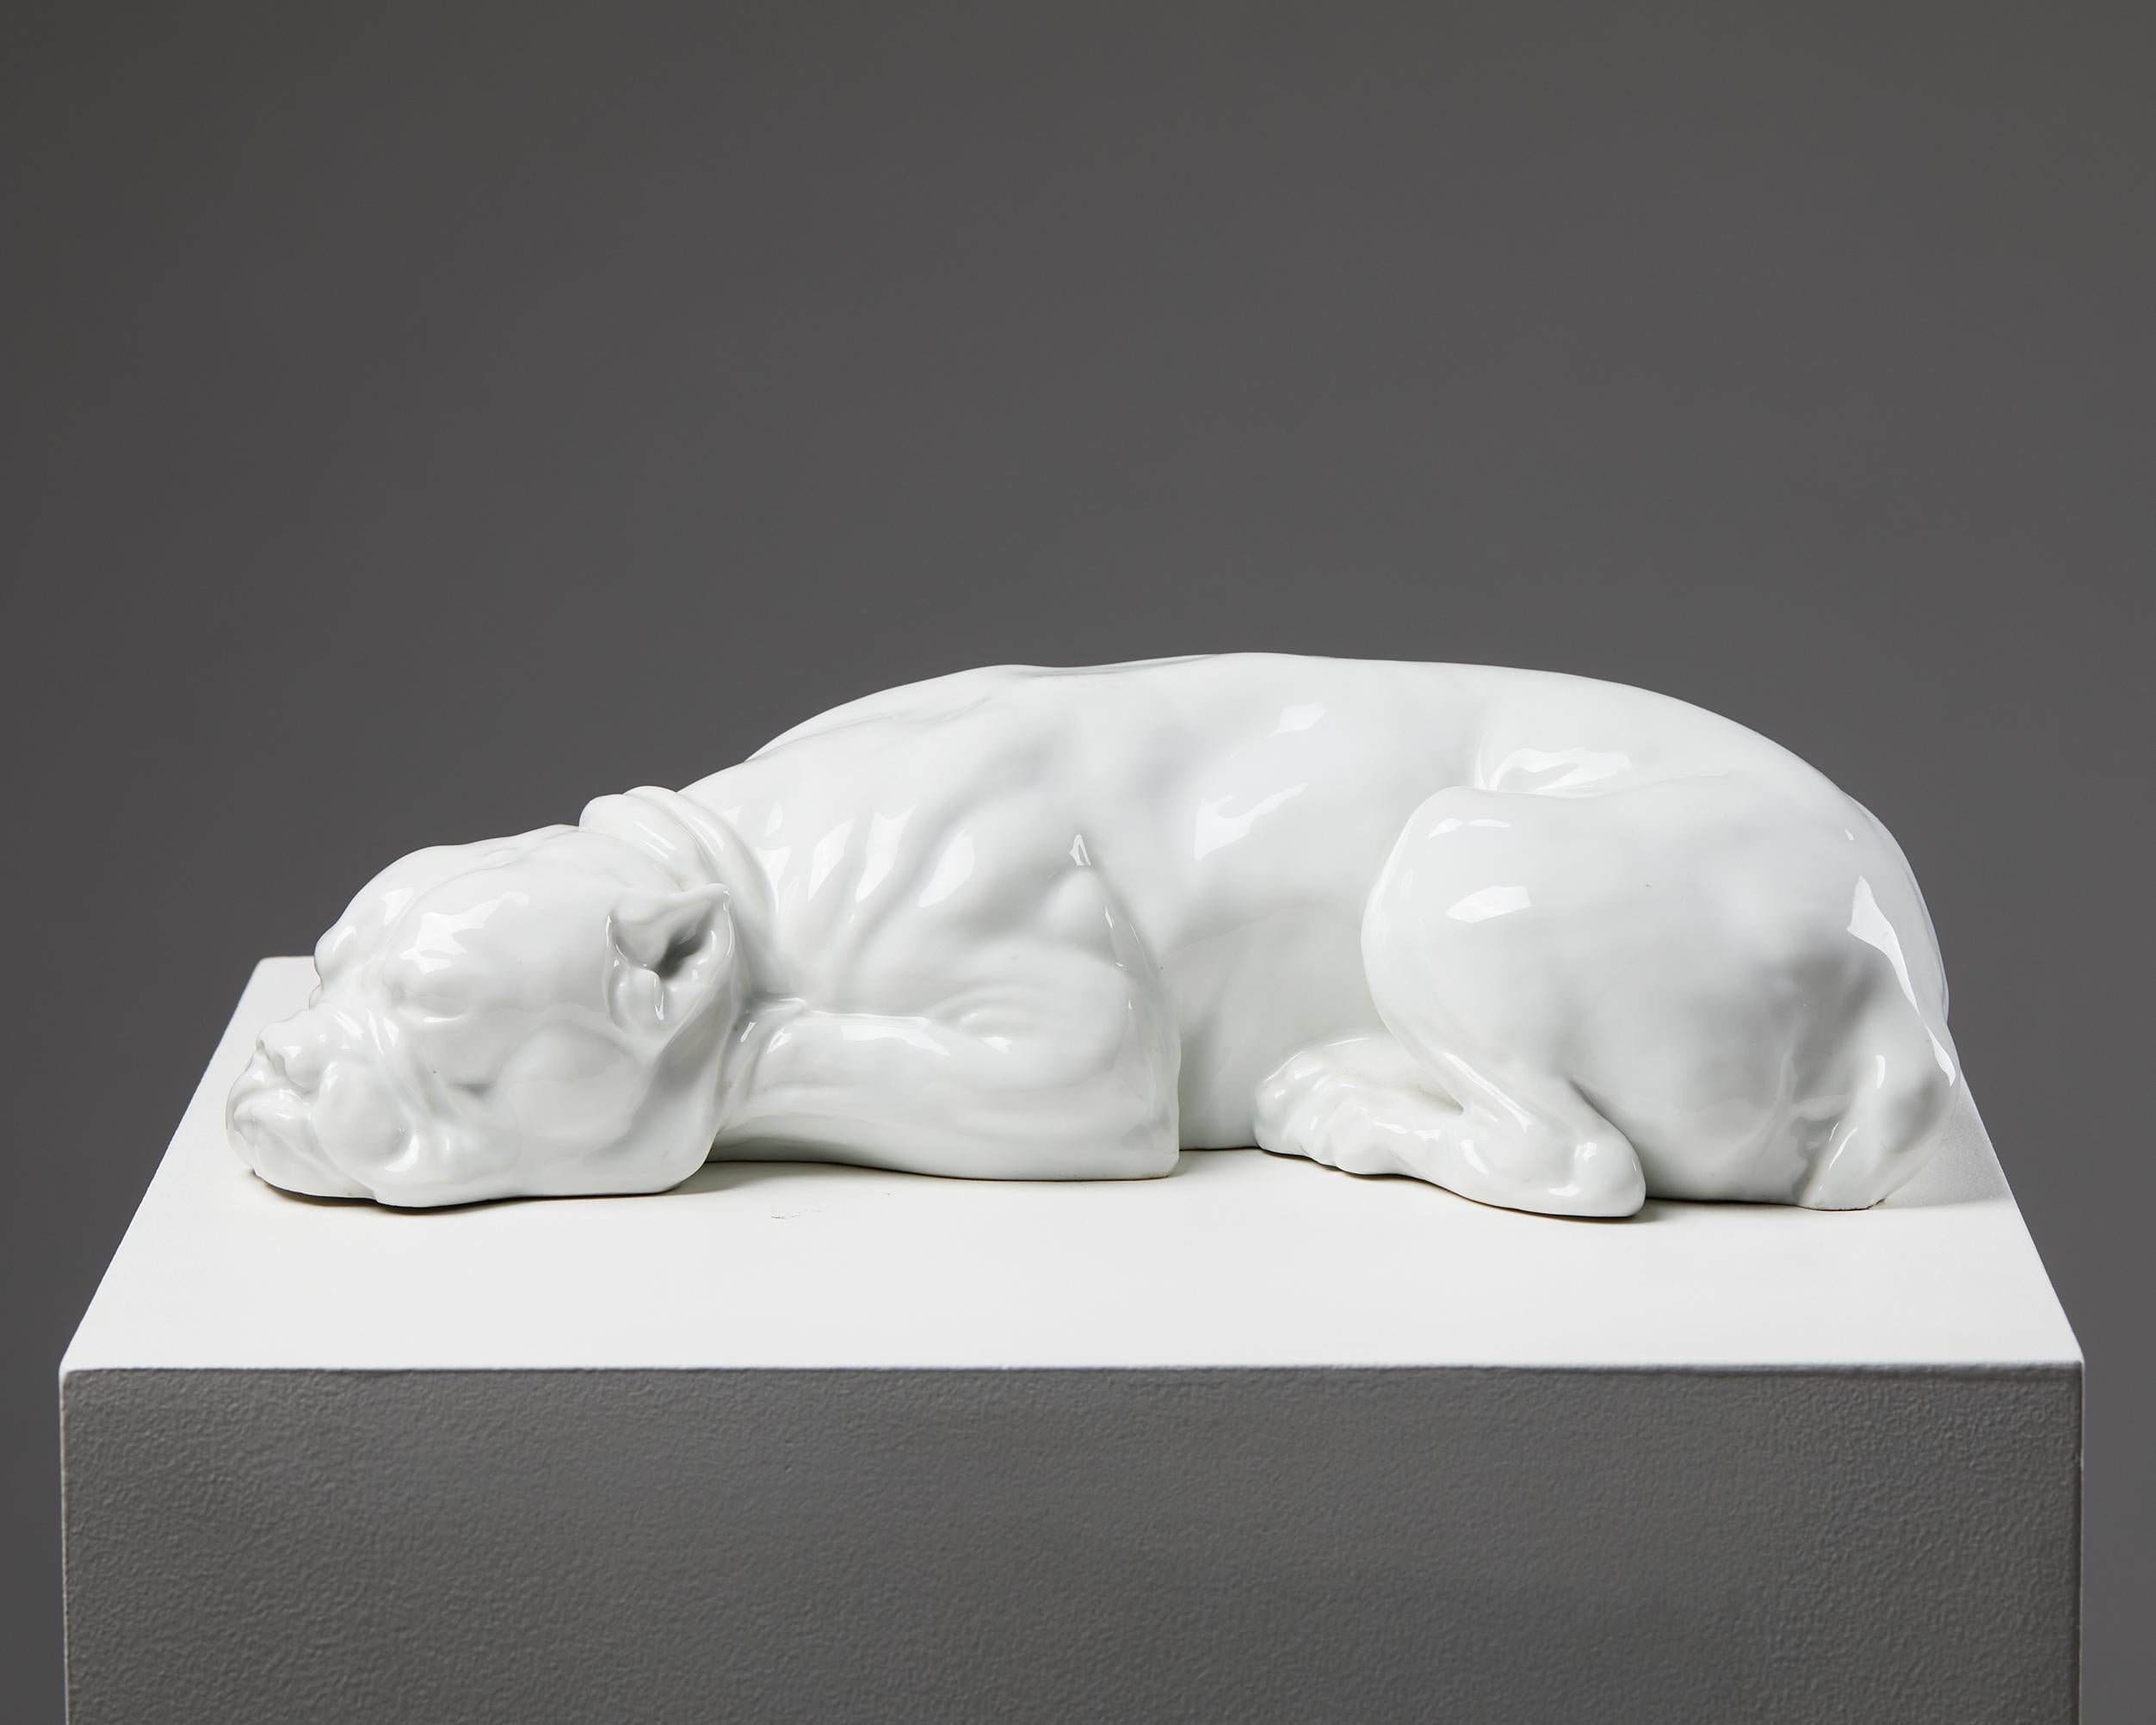 Finnish Sculpture 'Sleeping Boxer' Designed by Thure Öberg for Arabia, Finland, 1910 For Sale